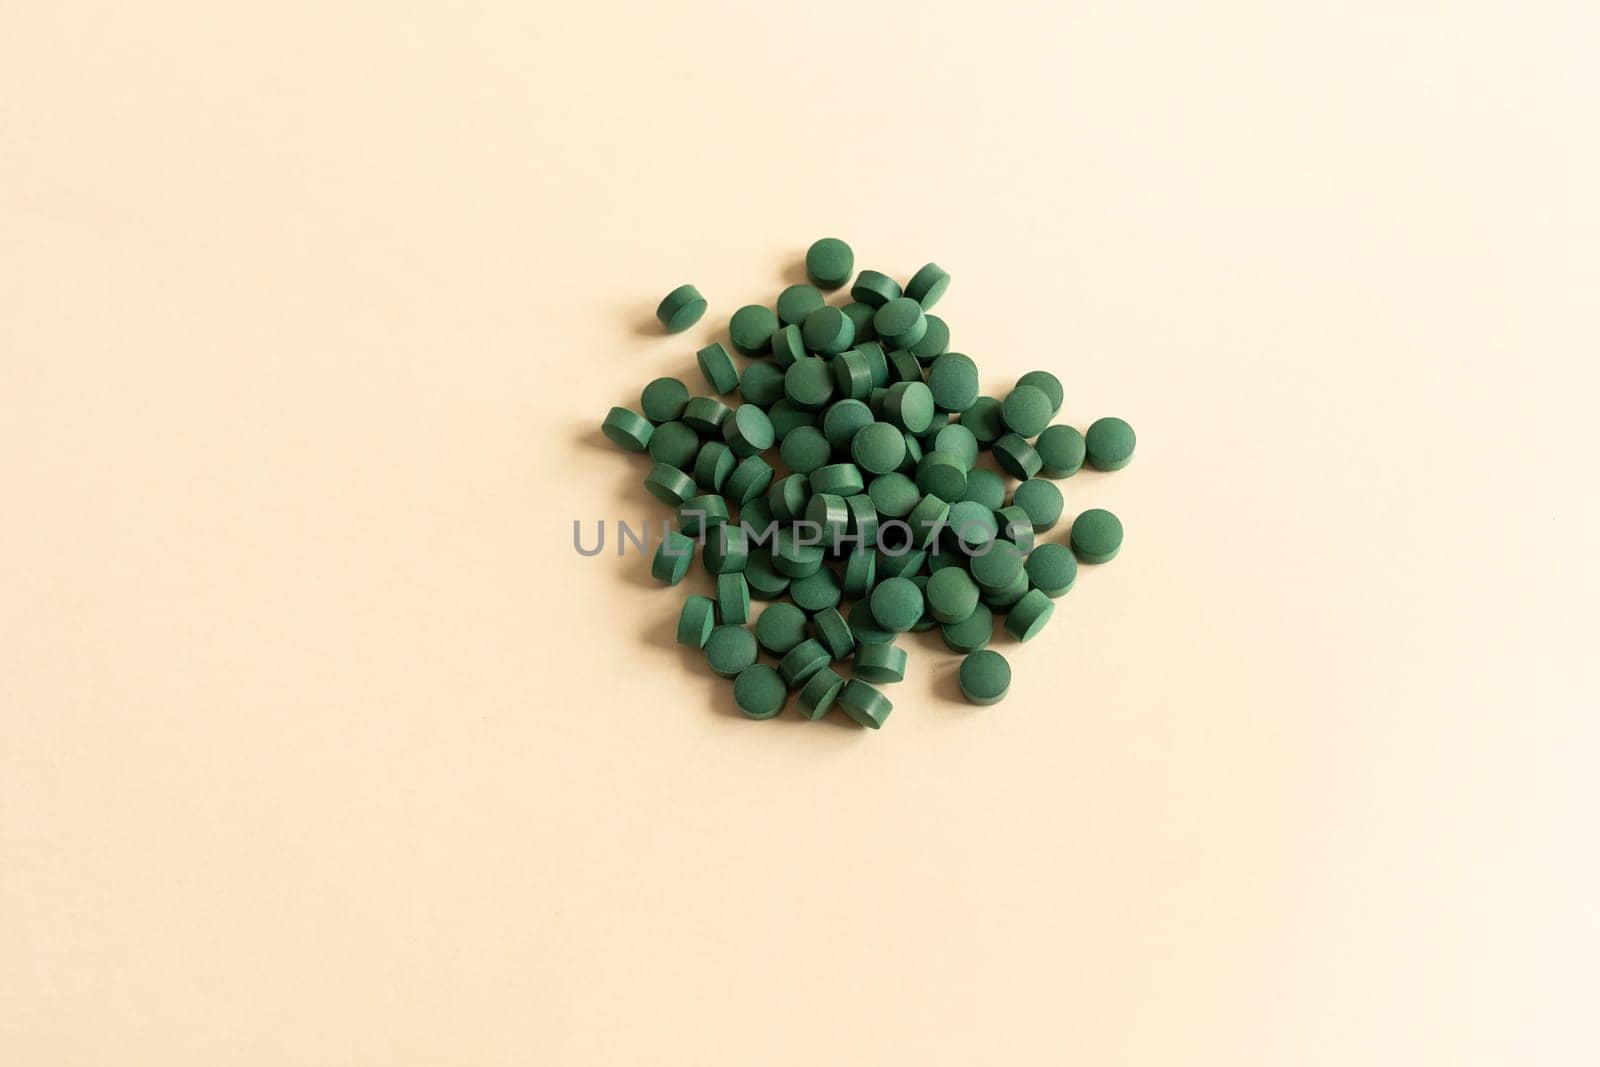 Flat Lay Vitamin, Easy To Swallow Green Pills Of Natural Spirulina On Beige Background. They Are Made Of Blue-green Algae With Strong Antioxidant Effects. Horizontal. by netatsi